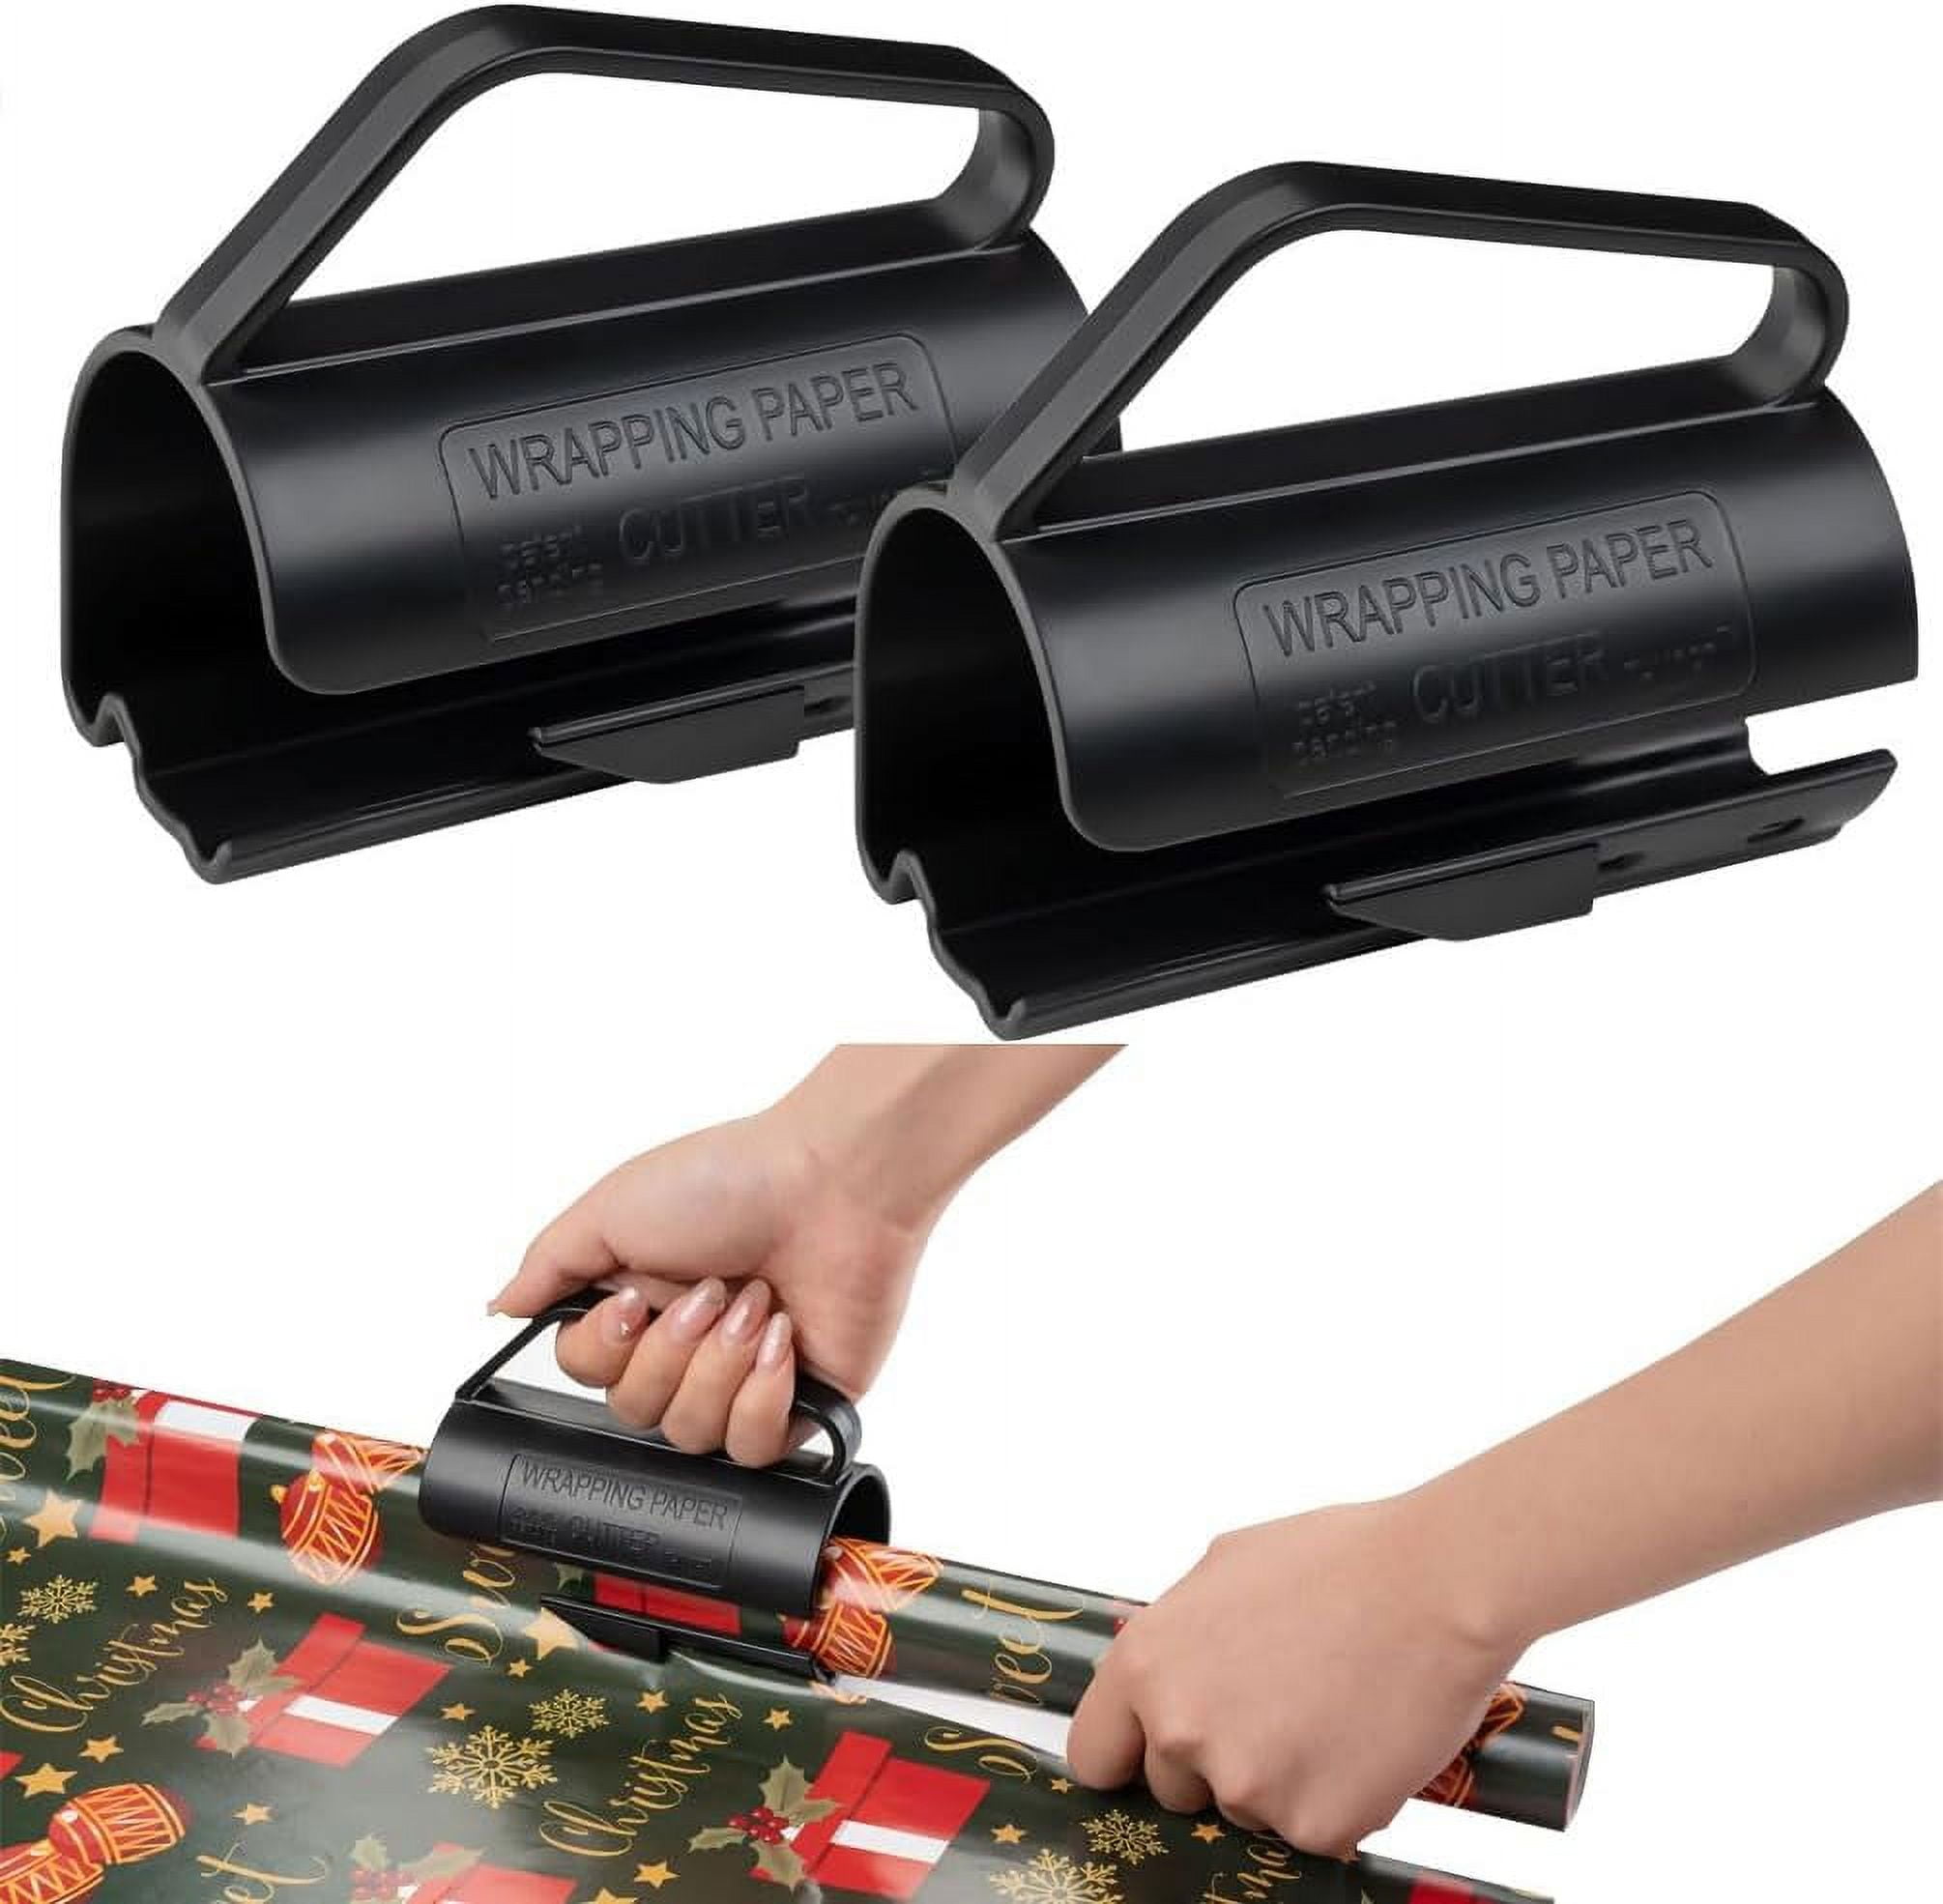  Wrapping Paper Roll Cutter, 2Pcs Wrapping Paper